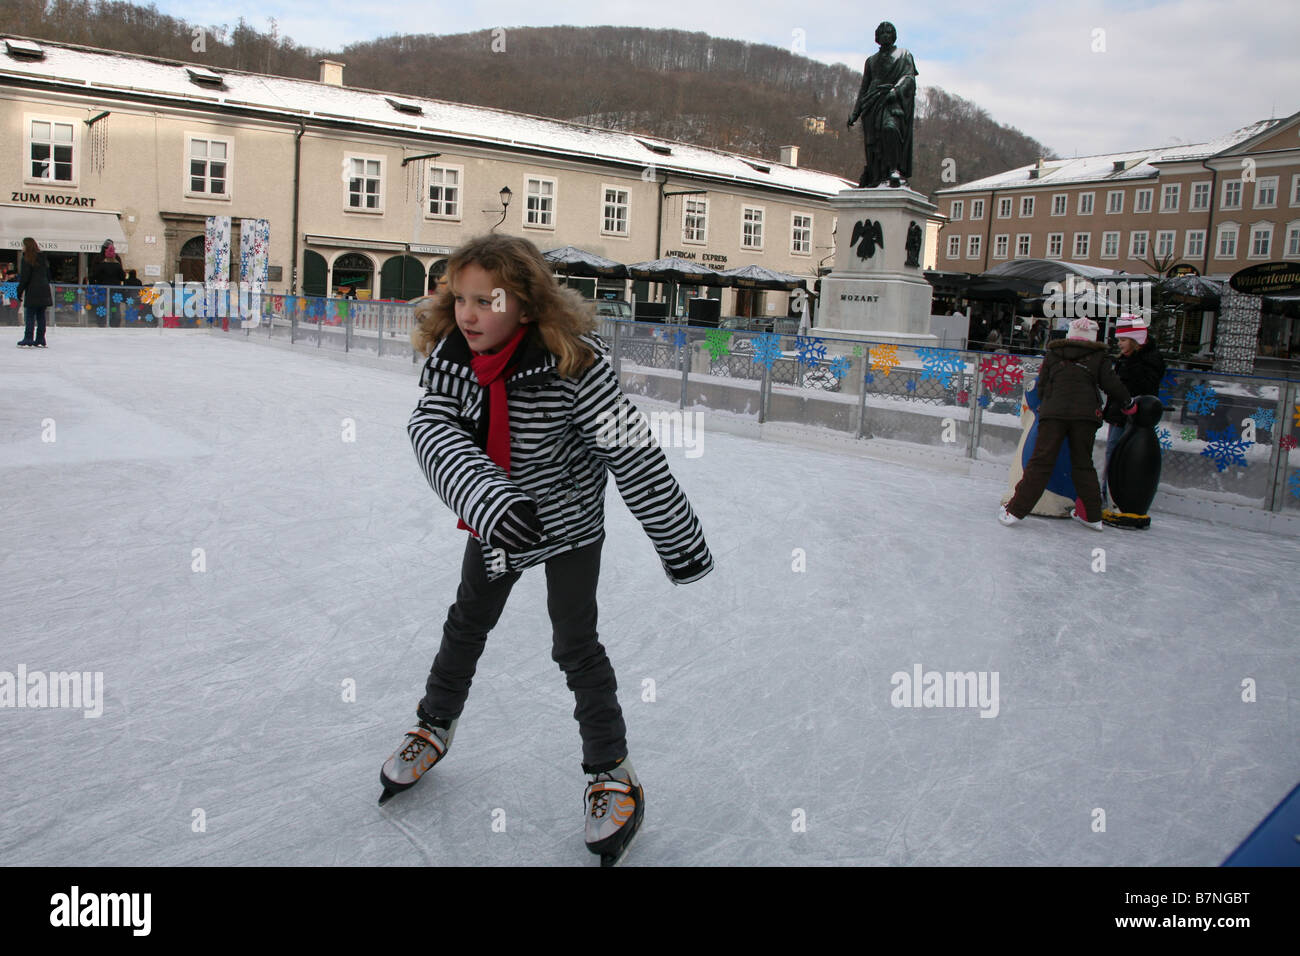 People skating on the skating ice rink at Mozartplatz with the monument to Mozart in the historic centre of Salzburg, Austria. Stock Photo